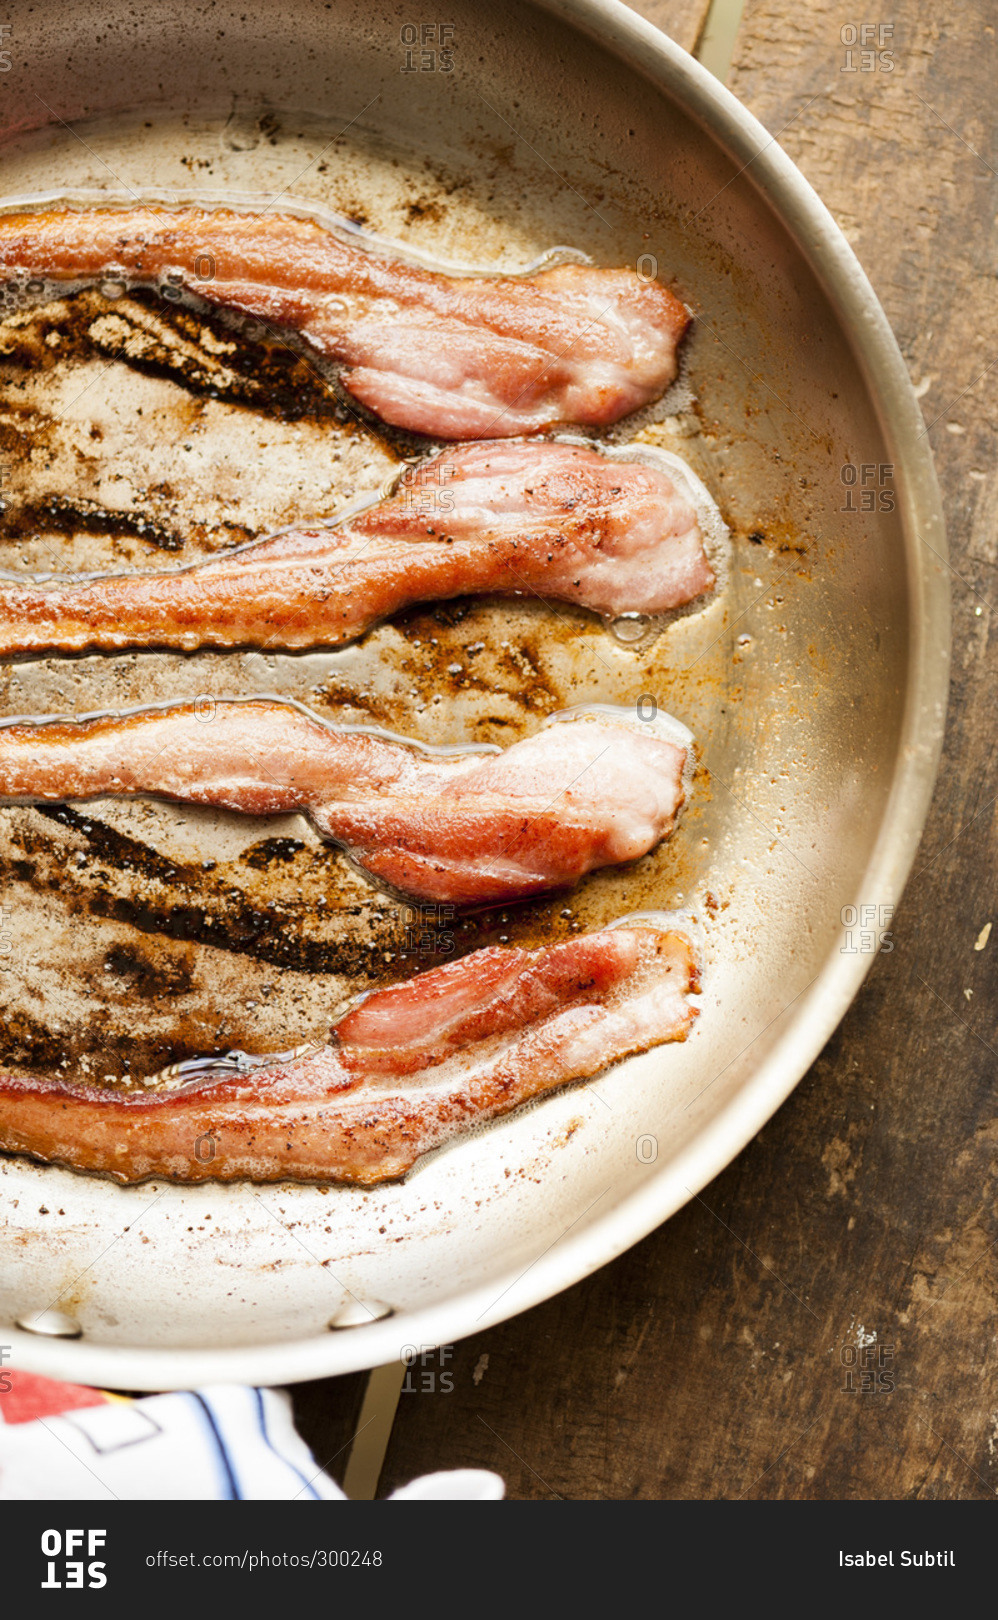 Strips of bacon in skillet on wooden table